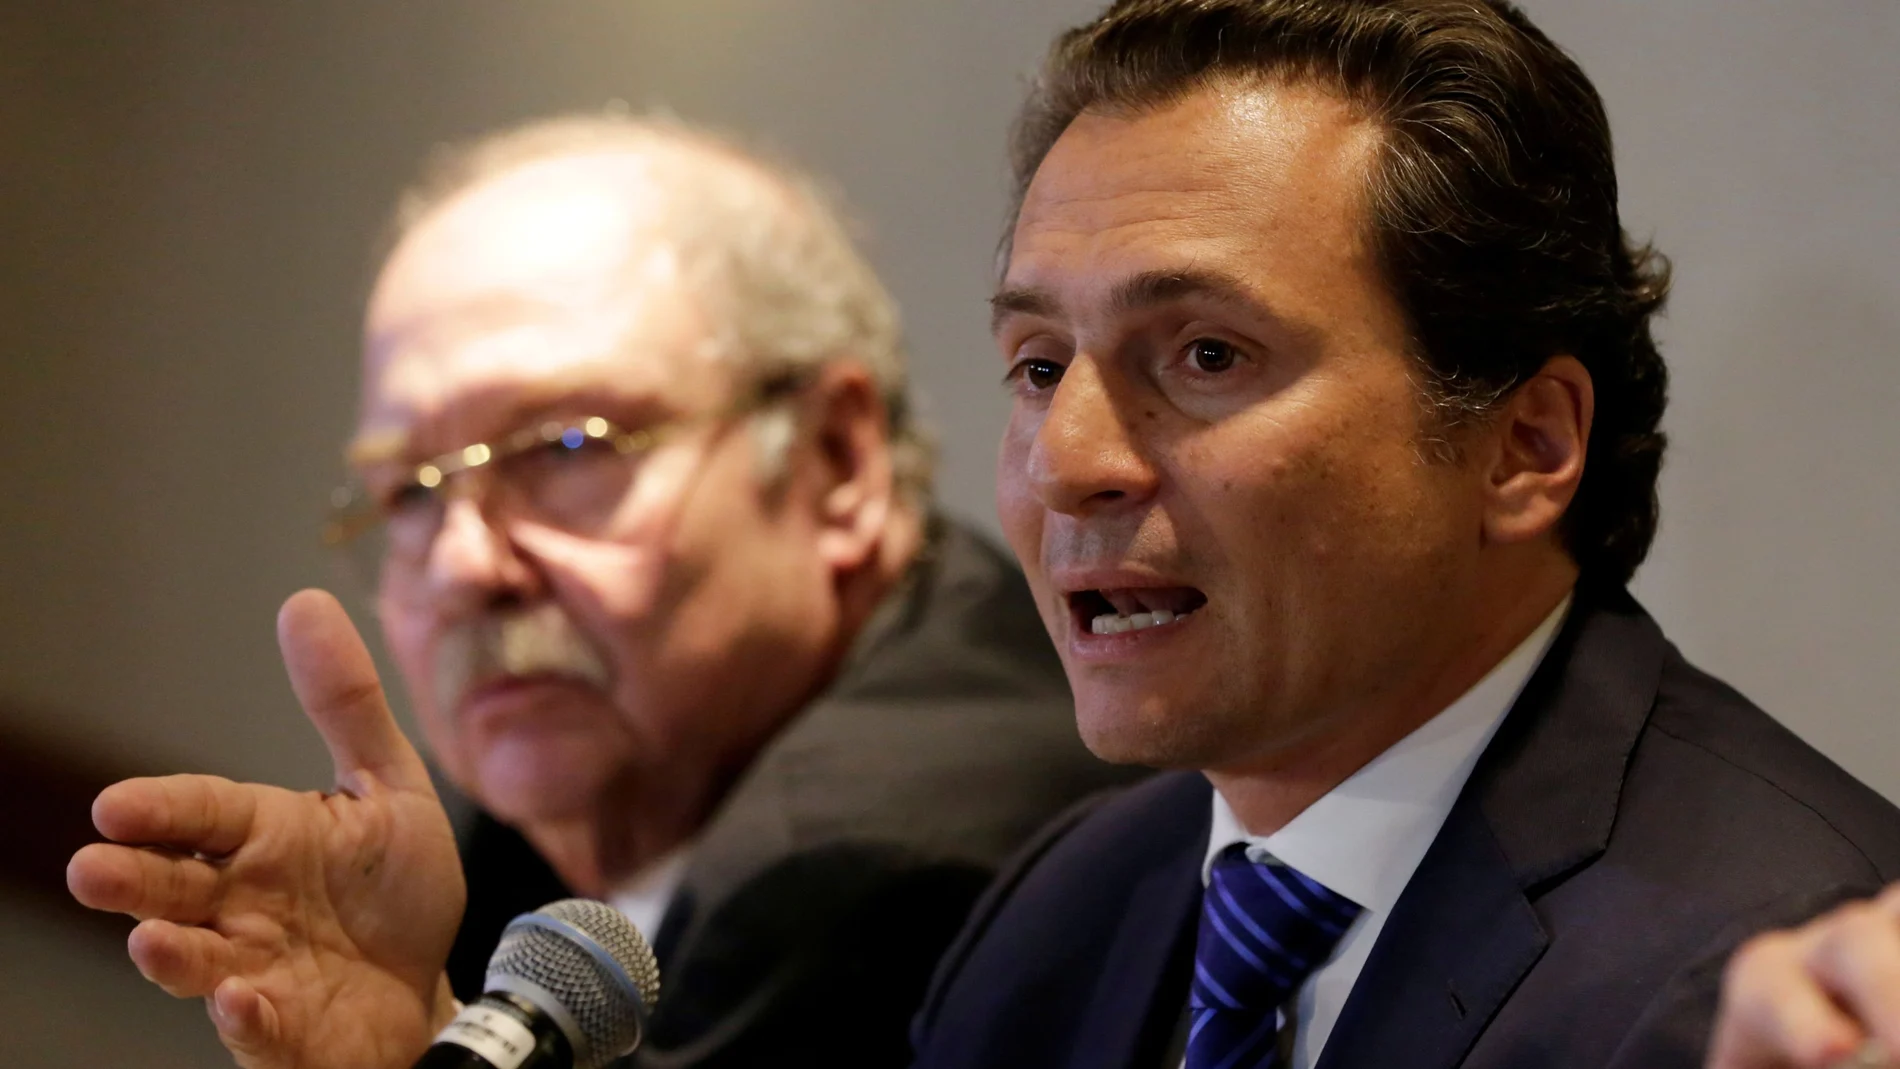 FILE PHOTO: Emilio Lozoya, former chief Executive Officer of Petroleos Mexicanos (Pemex) speaks next to his lawyer Javier Coello Trejo during a news conference at a hotel after he leaves Mexico's attorney general's office, in Mexico City